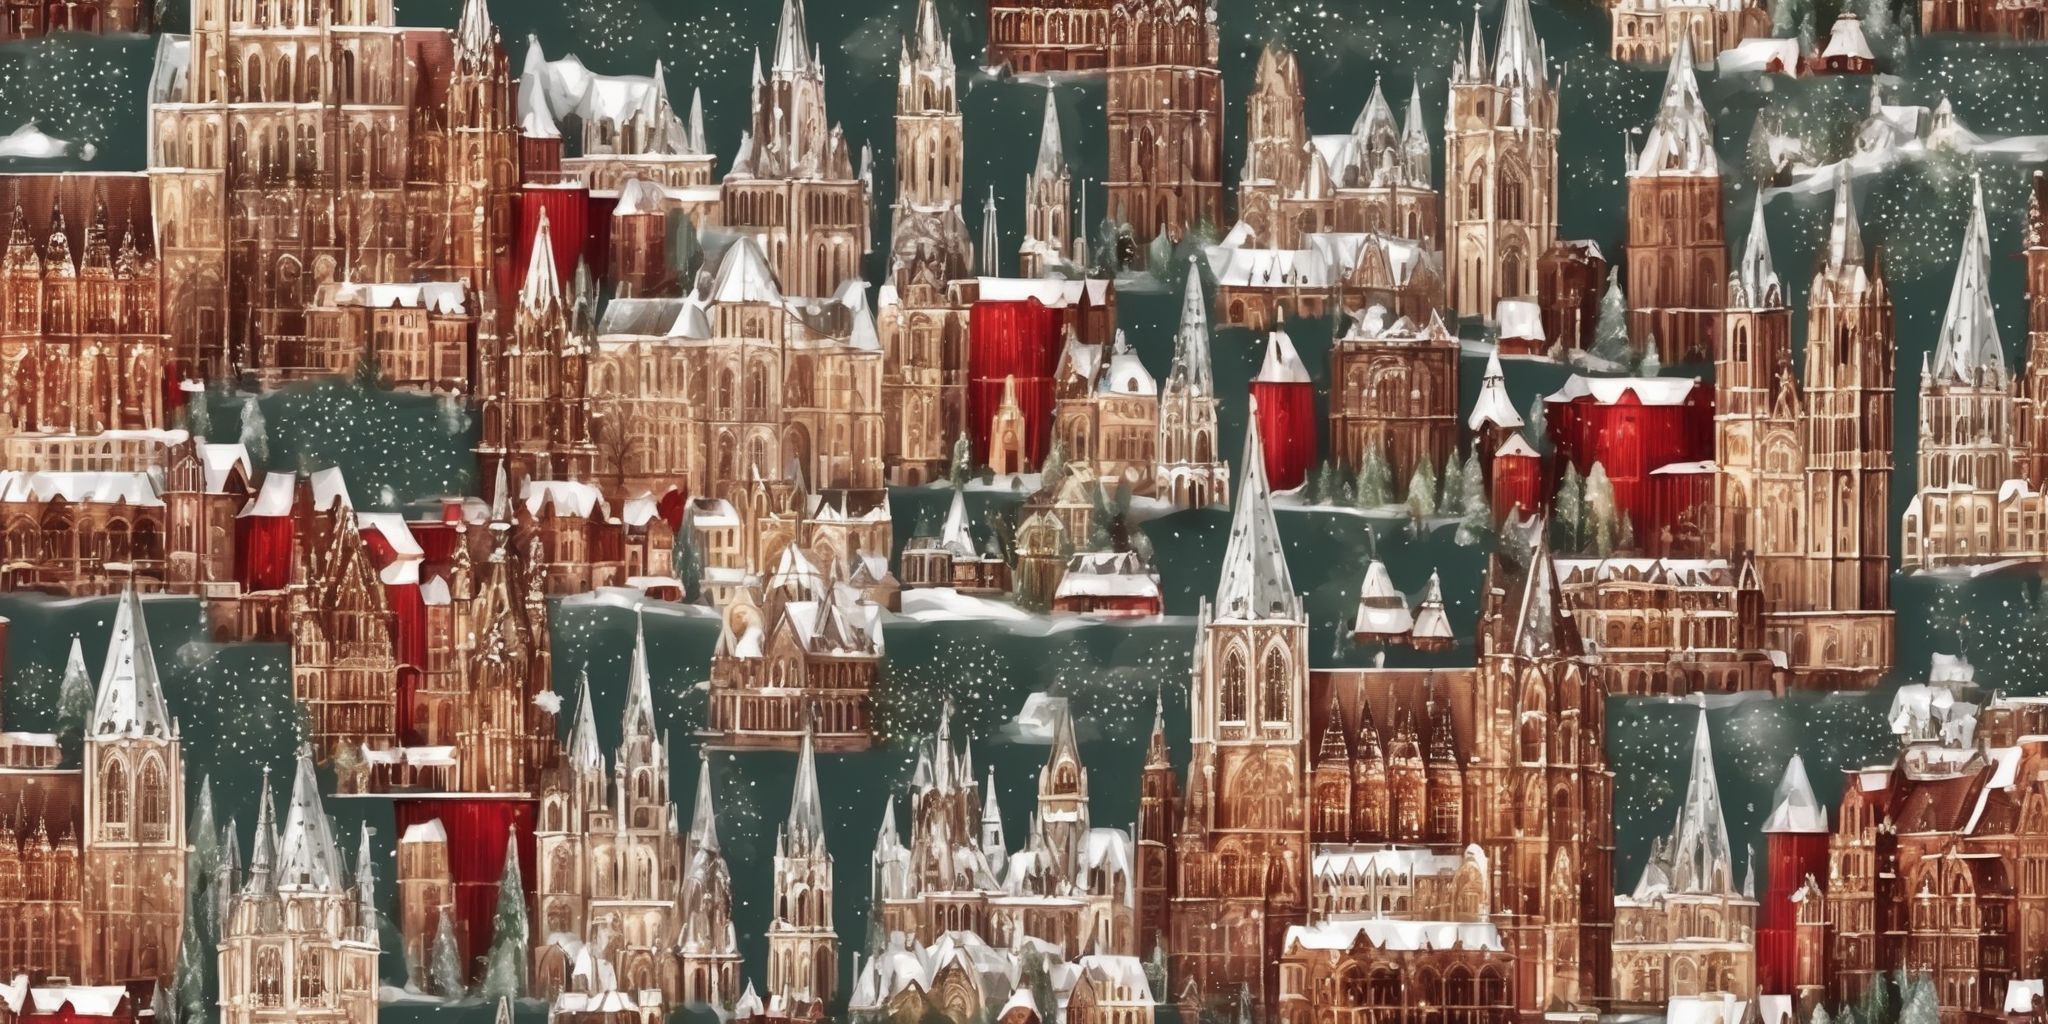 Cologne in realistic Christmas style